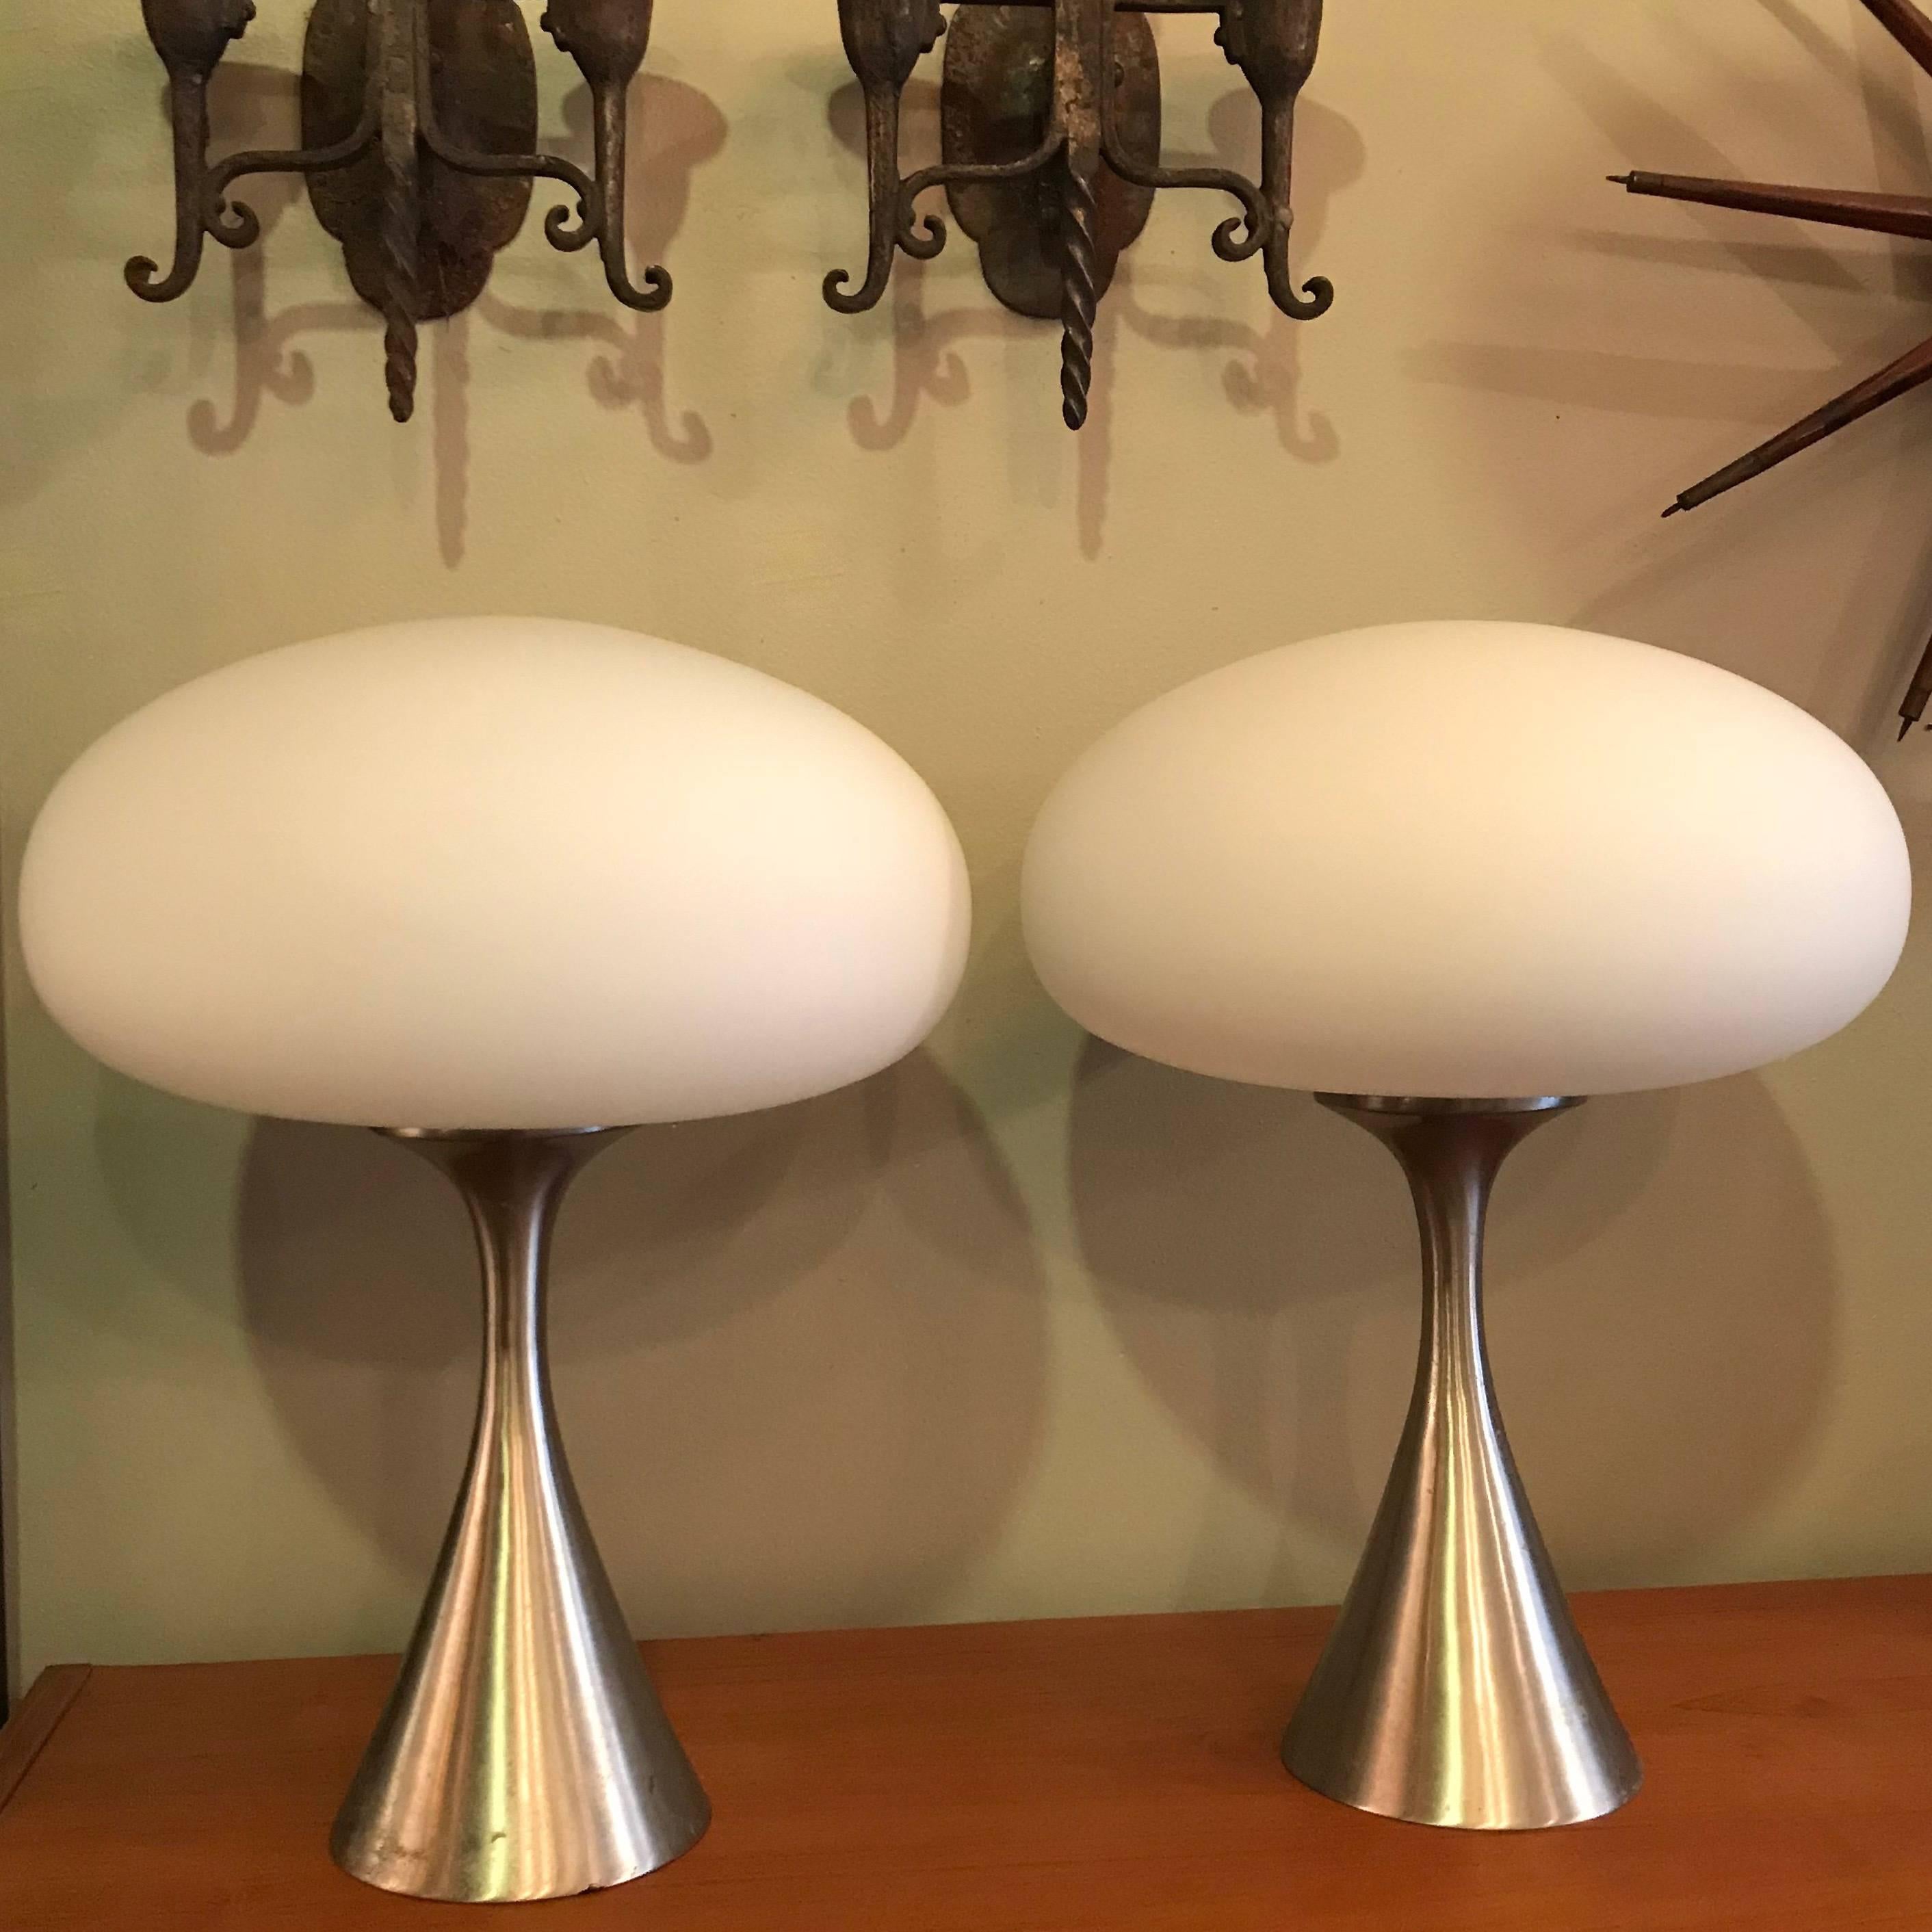 Pair of Mid-Century Modern, mushroom lamps by Bill Curry for Laurel feature frosted white shades and brushed chrome bases. Another pair is available with polished chrome bases.